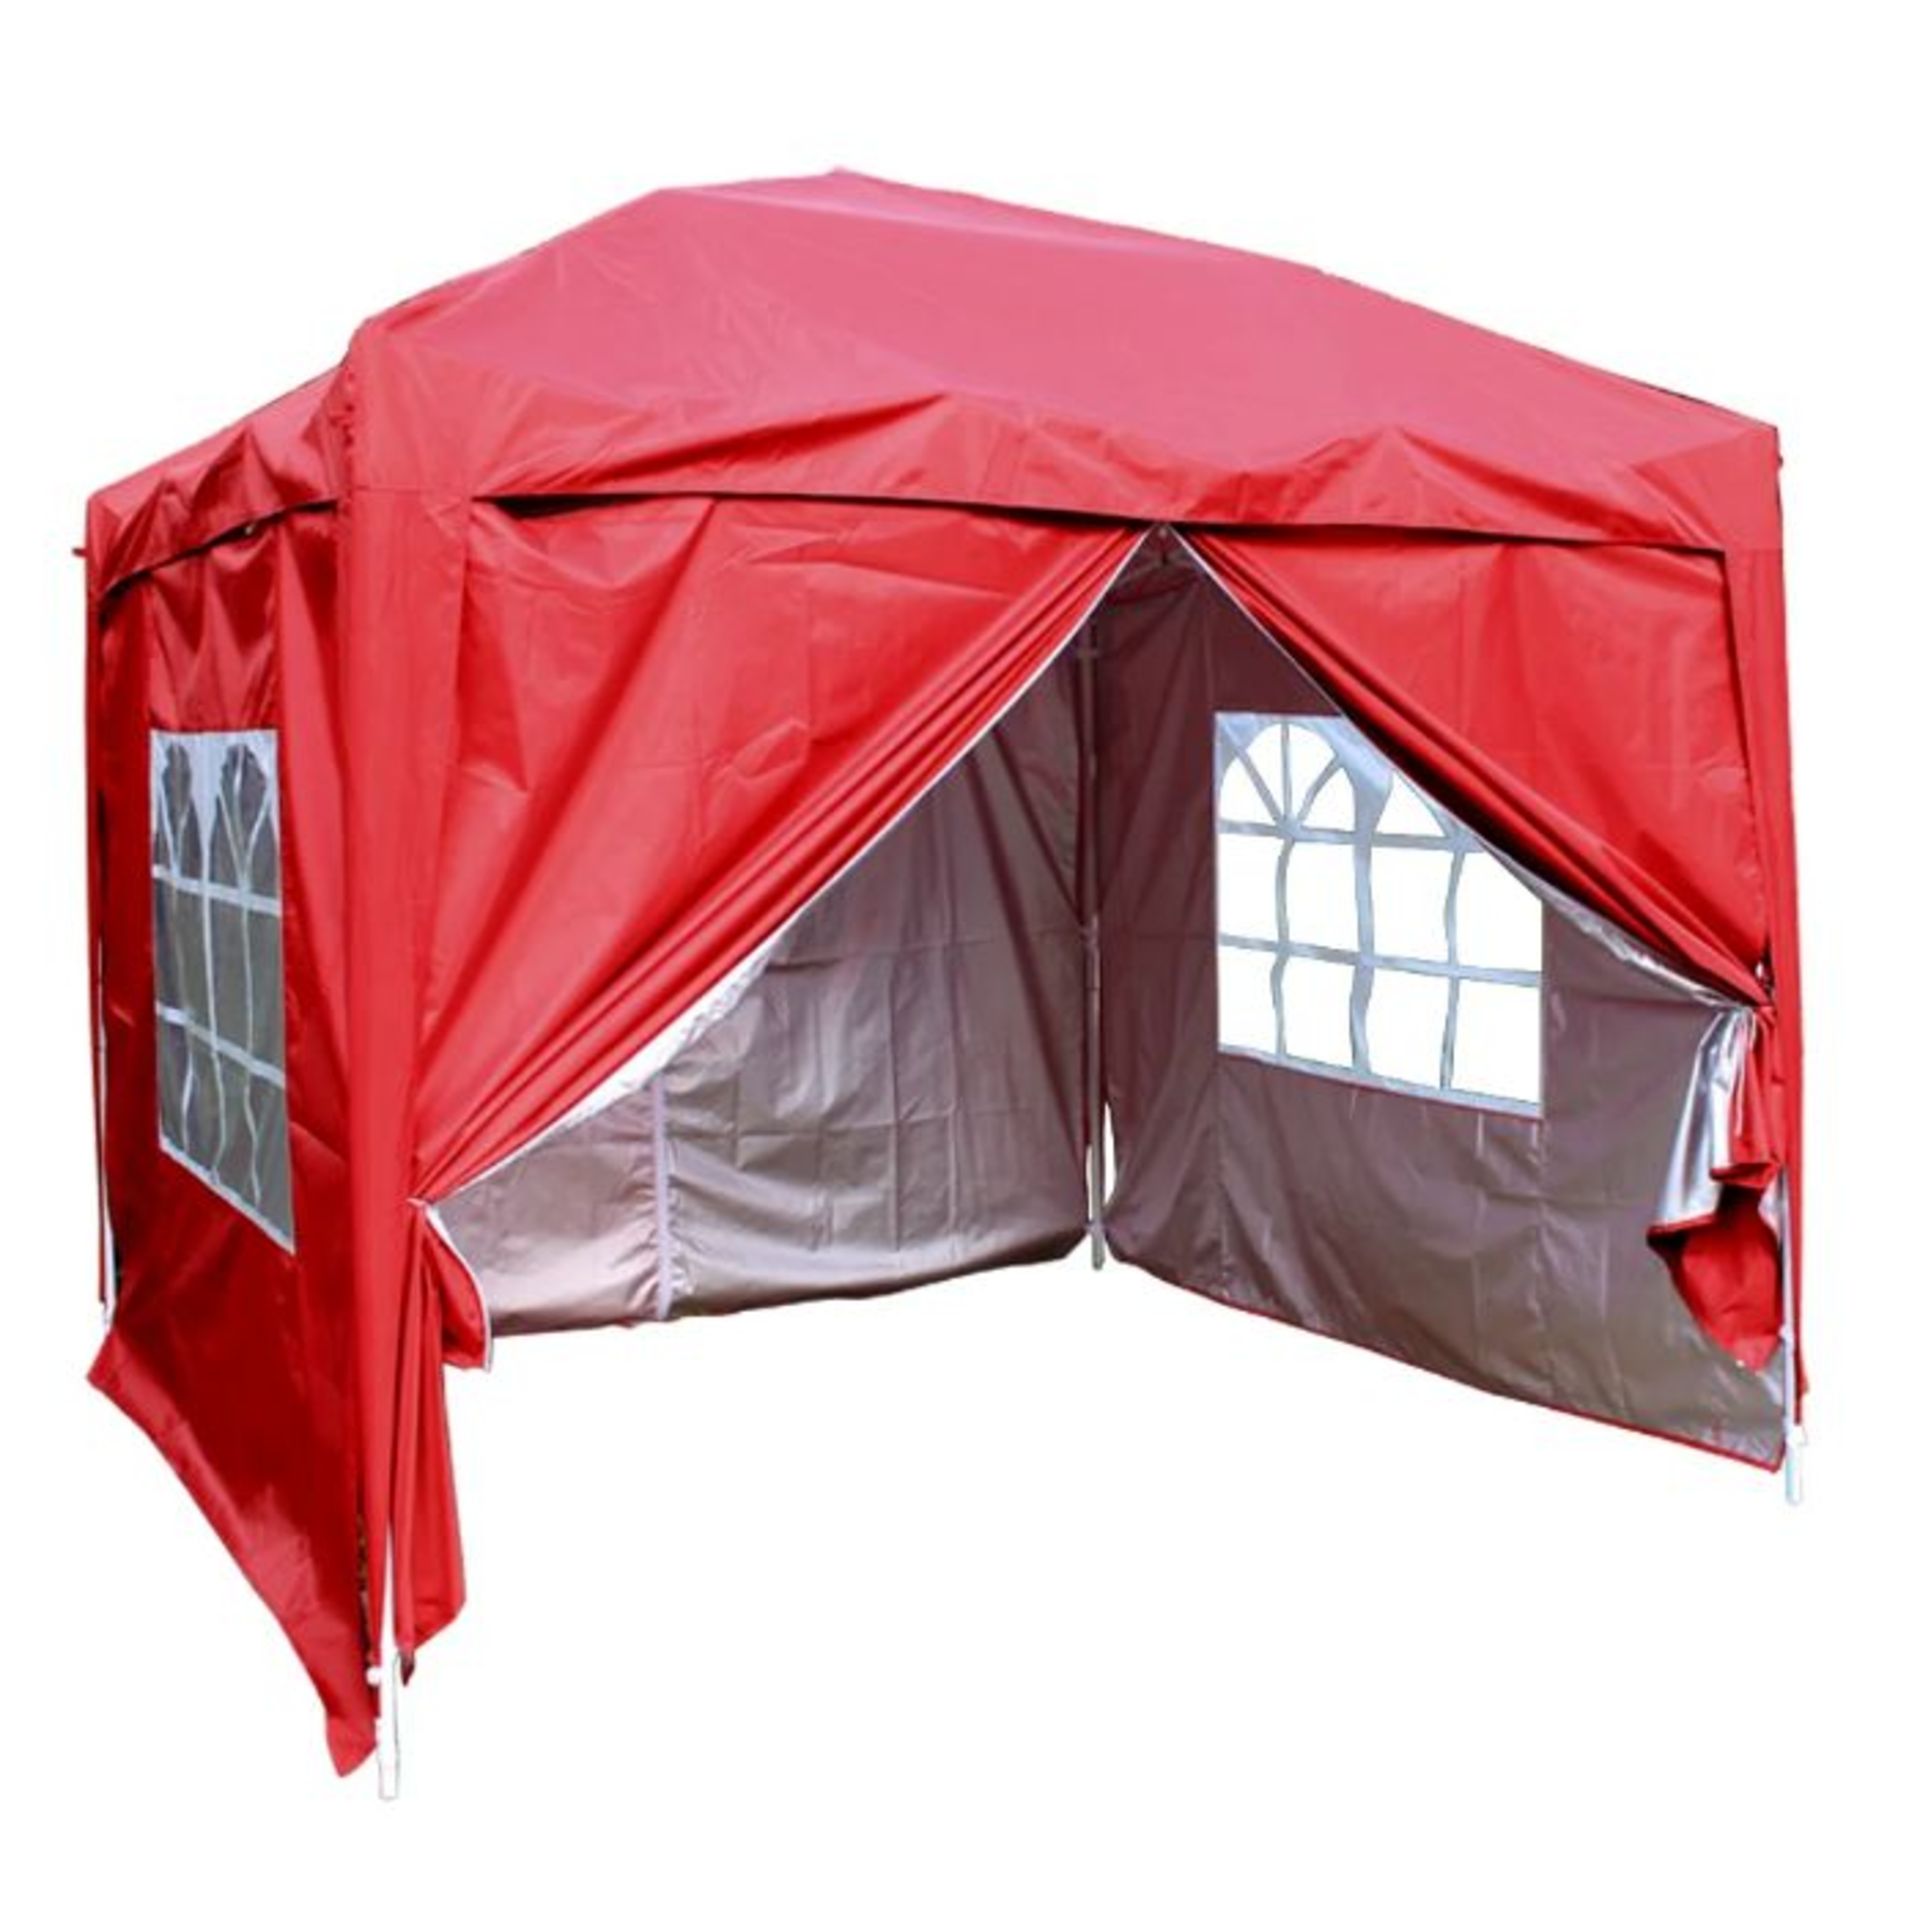 Dakota Fields, 2.5 X 2.5M Pop Up Gazebo Top Cover Replacement Only (RED) RRP -£129.99 (27536/14 -GEE